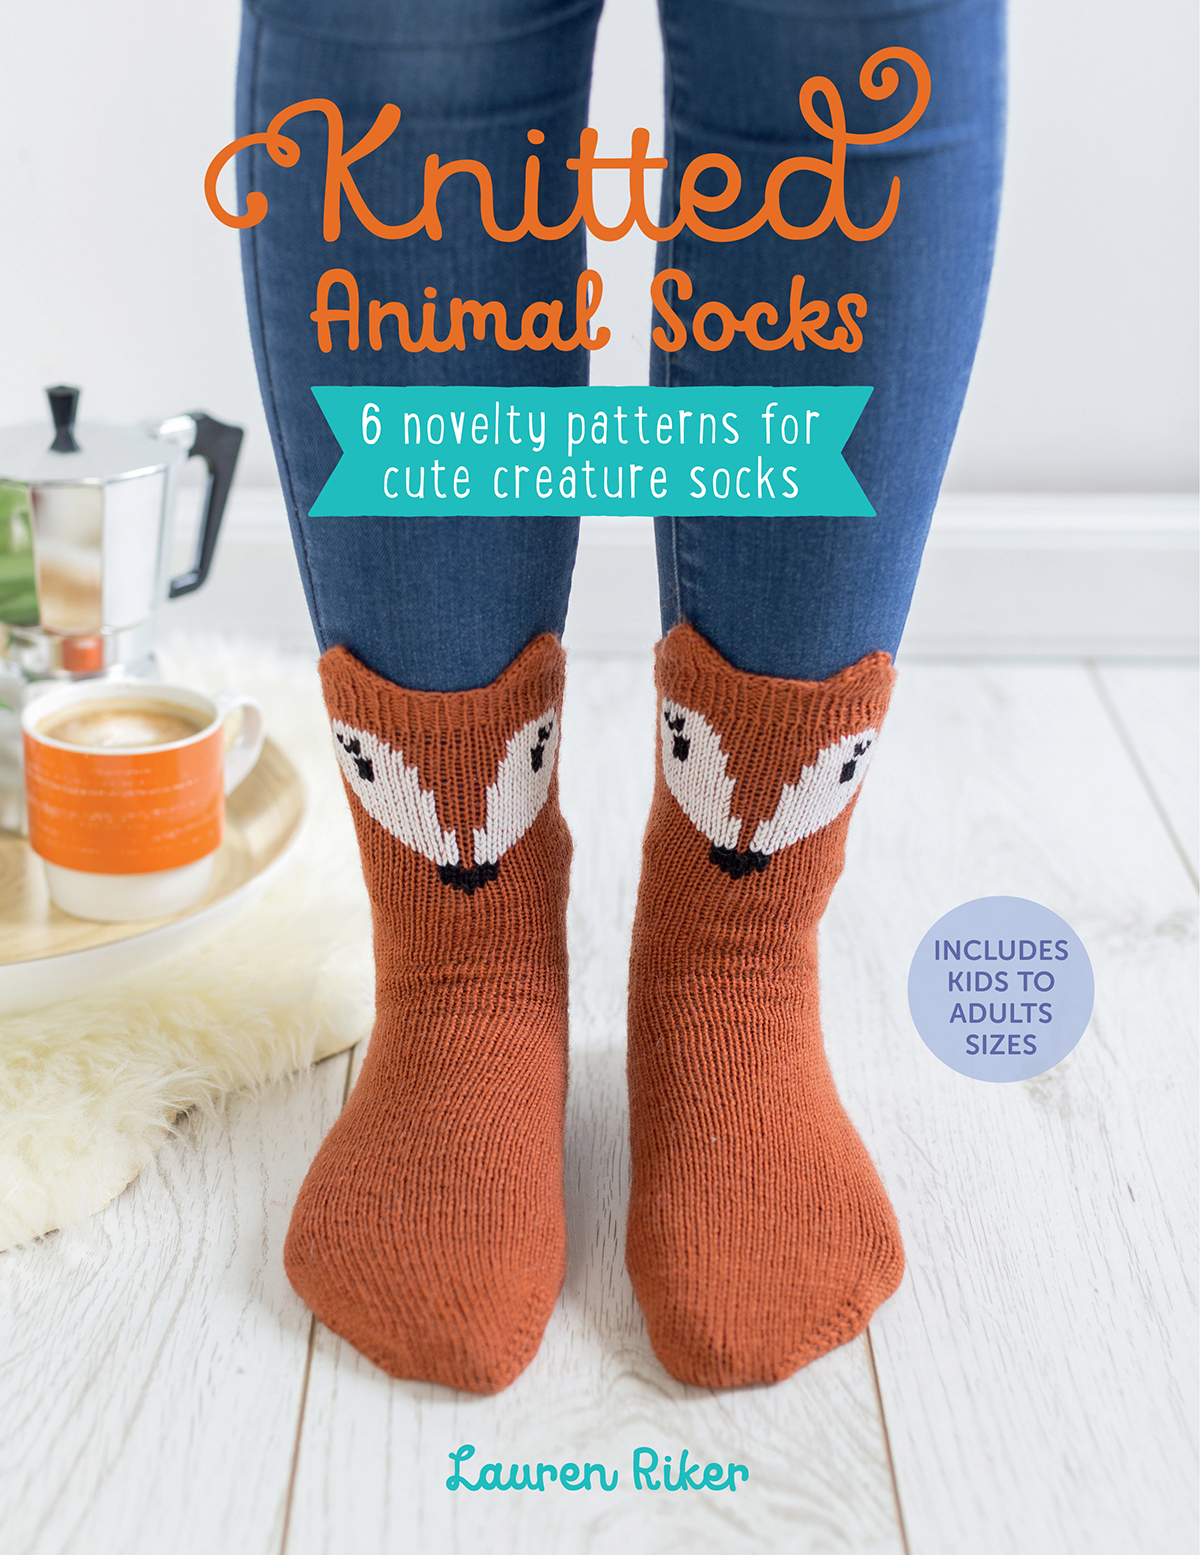 Knitted Animal Socks 6 Novelty Patterns for Cute Creature Socks - image 1